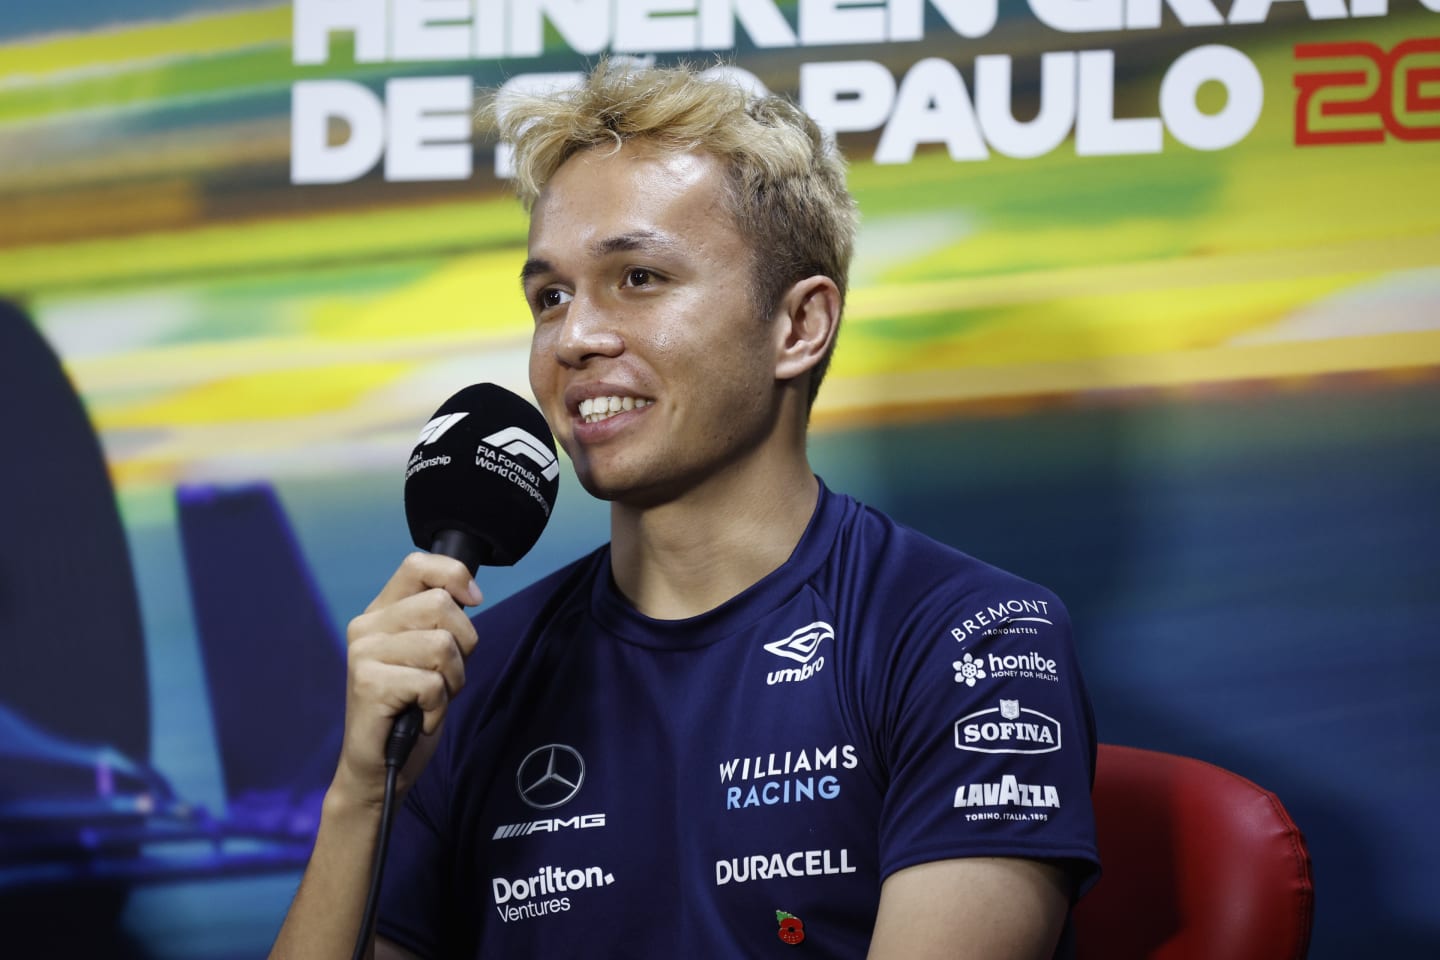 SAO PAULO, BRAZIL - NOVEMBER 10: Alexander Albon of Thailand and Williams attends the Drivers Press Conference during previews ahead of the F1 Grand Prix of Brazil at Autodromo Jose Carlos Pace on November 10, 2022 in Sao Paulo, Brazil. (Photo by Jared C. Tilton/Getty Images)